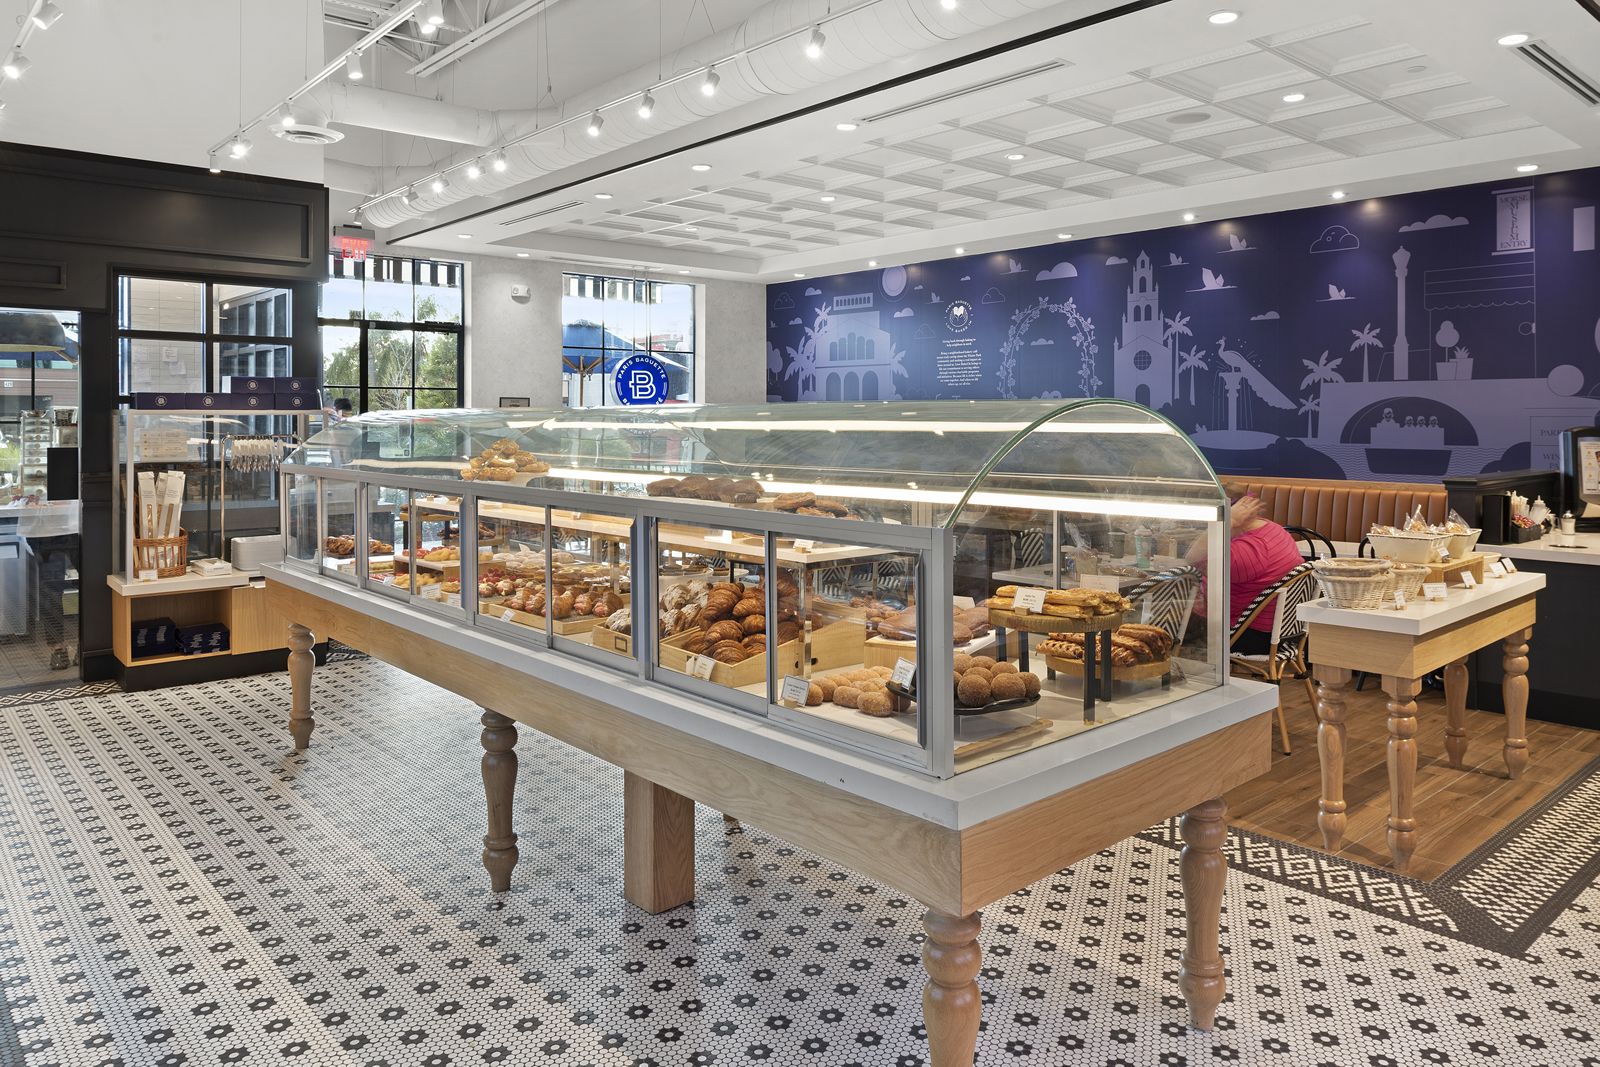 Paris Baguette Continues To Dominate the Bakery Franchise Industry, Signs Agreement in Irvine, CA for One Location